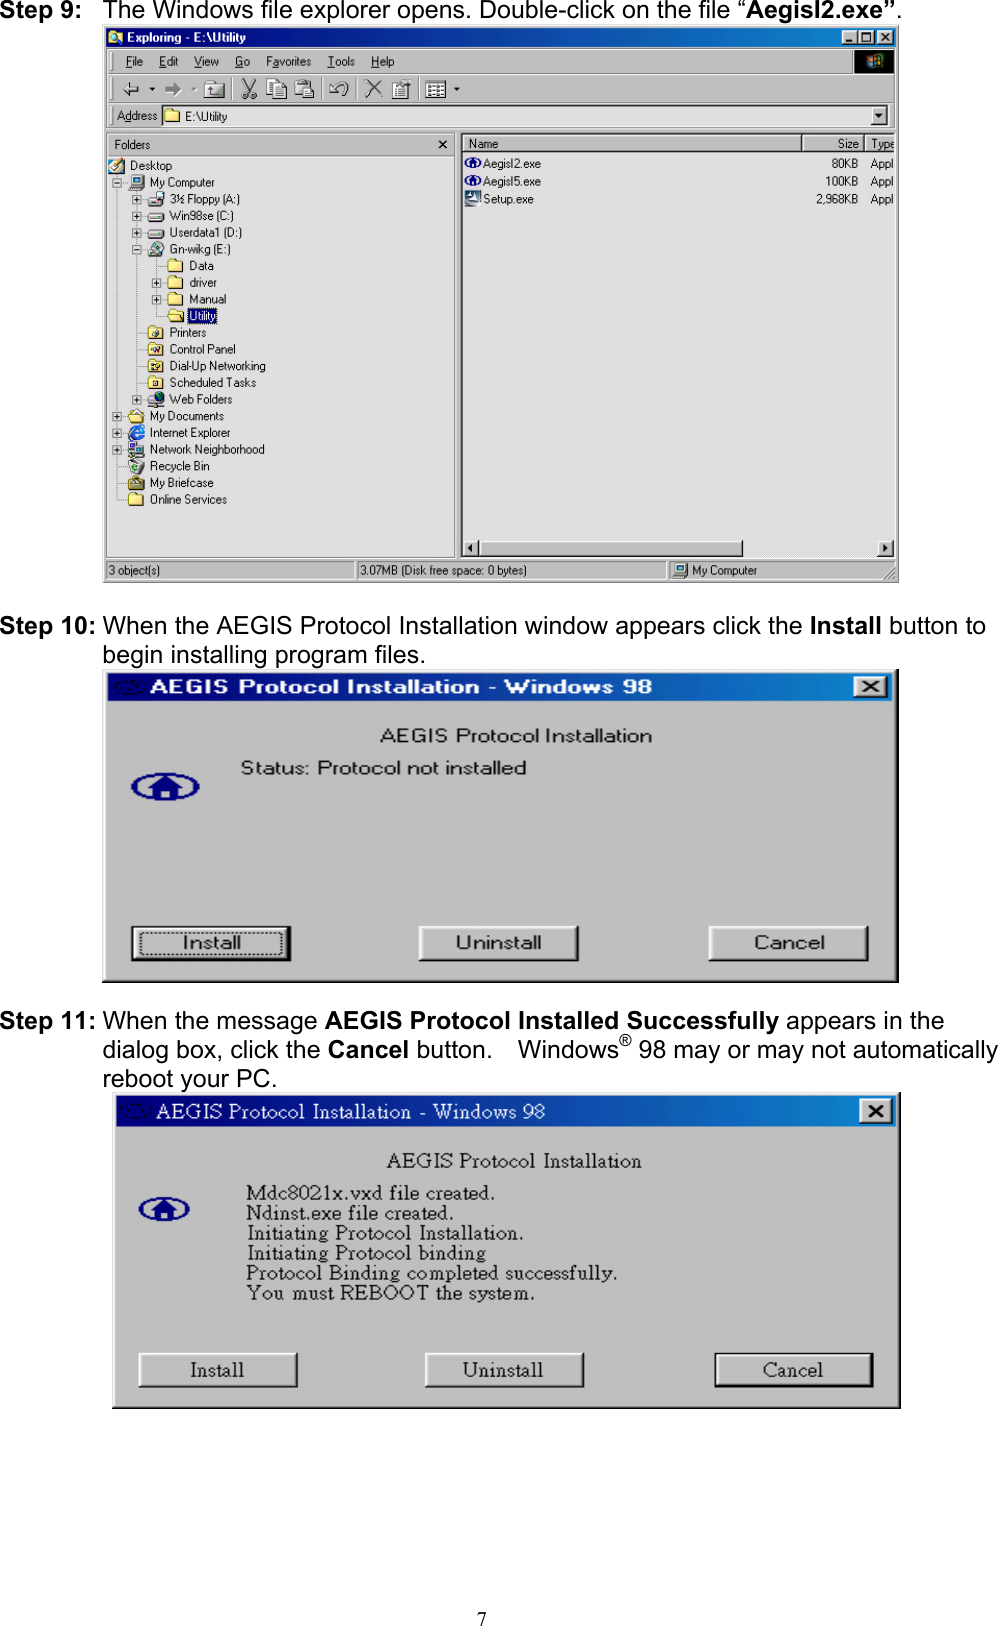 7  Step 9:  The Windows file explorer opens. Double-click on the file “AegisI2.exe”.   Step 10: When the AEGIS Protocol Installation window appears click the Install button to begin installing program files.   Step 11: When the message AEGIS Protocol Installed Successfully appears in the dialog box, click the Cancel button.  Windows® 98 may or may not automatically reboot your PC.    